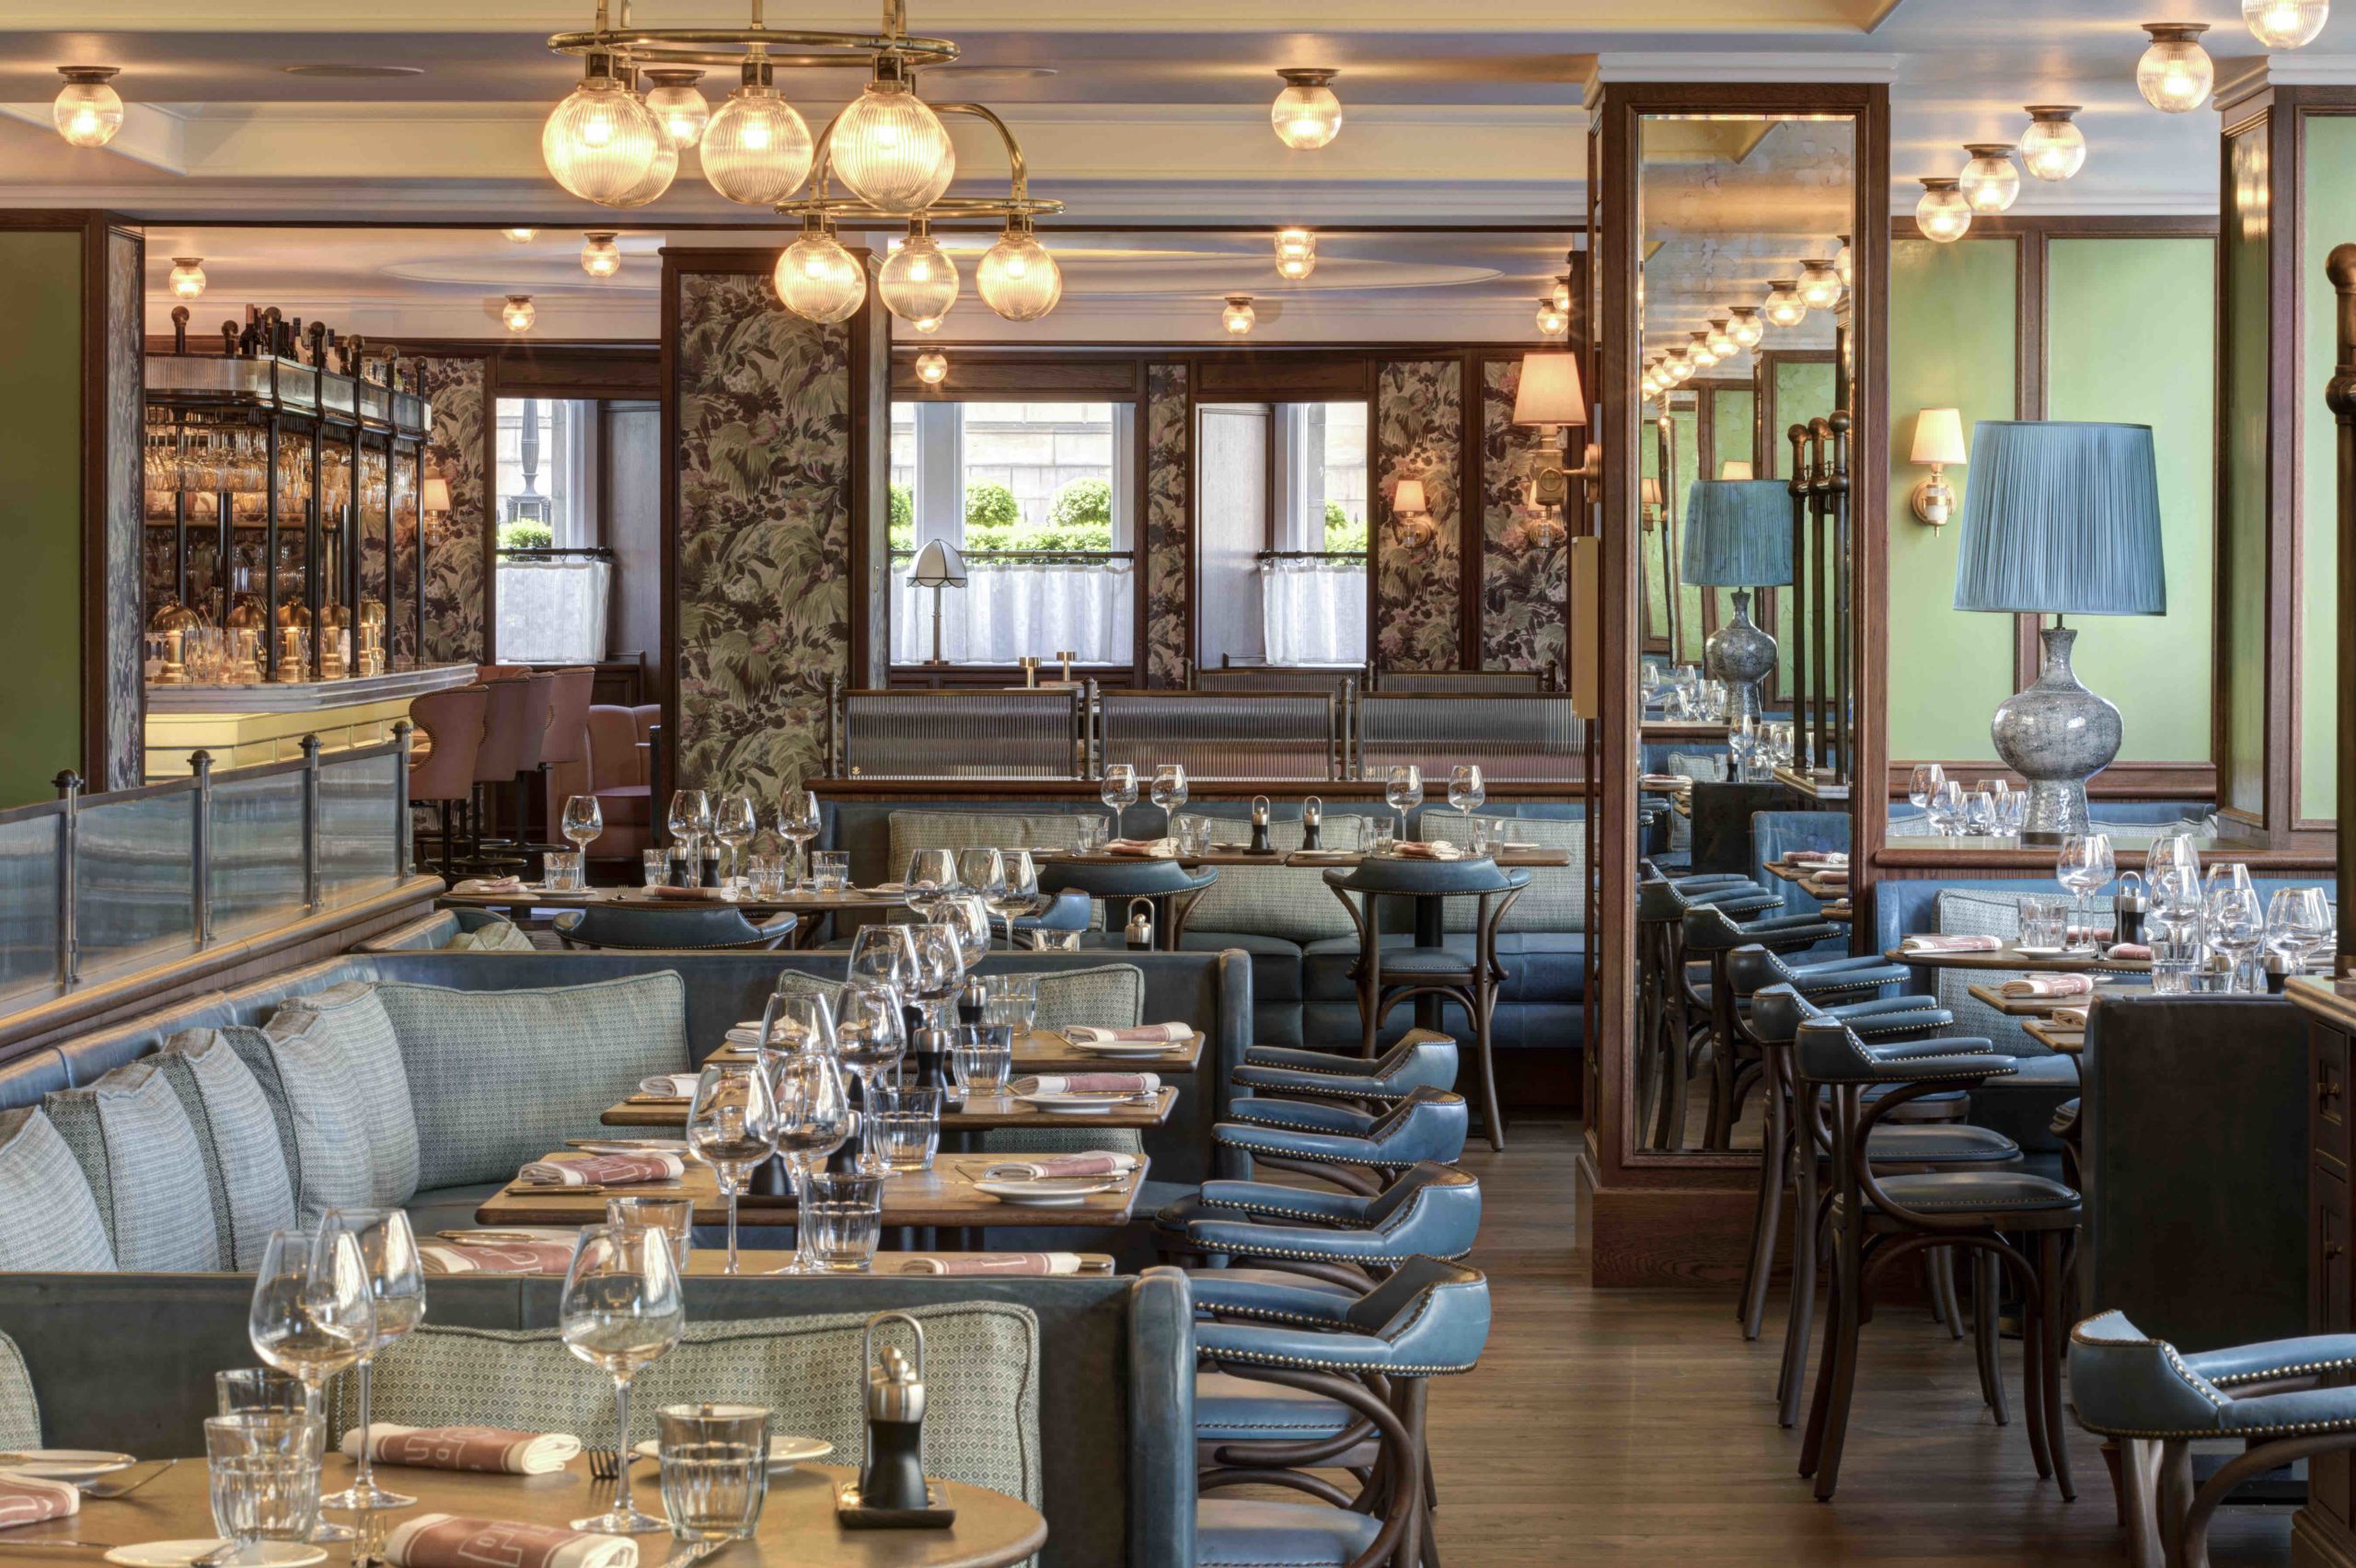 The Balmoral - Brasserie Prince by Alain Roux